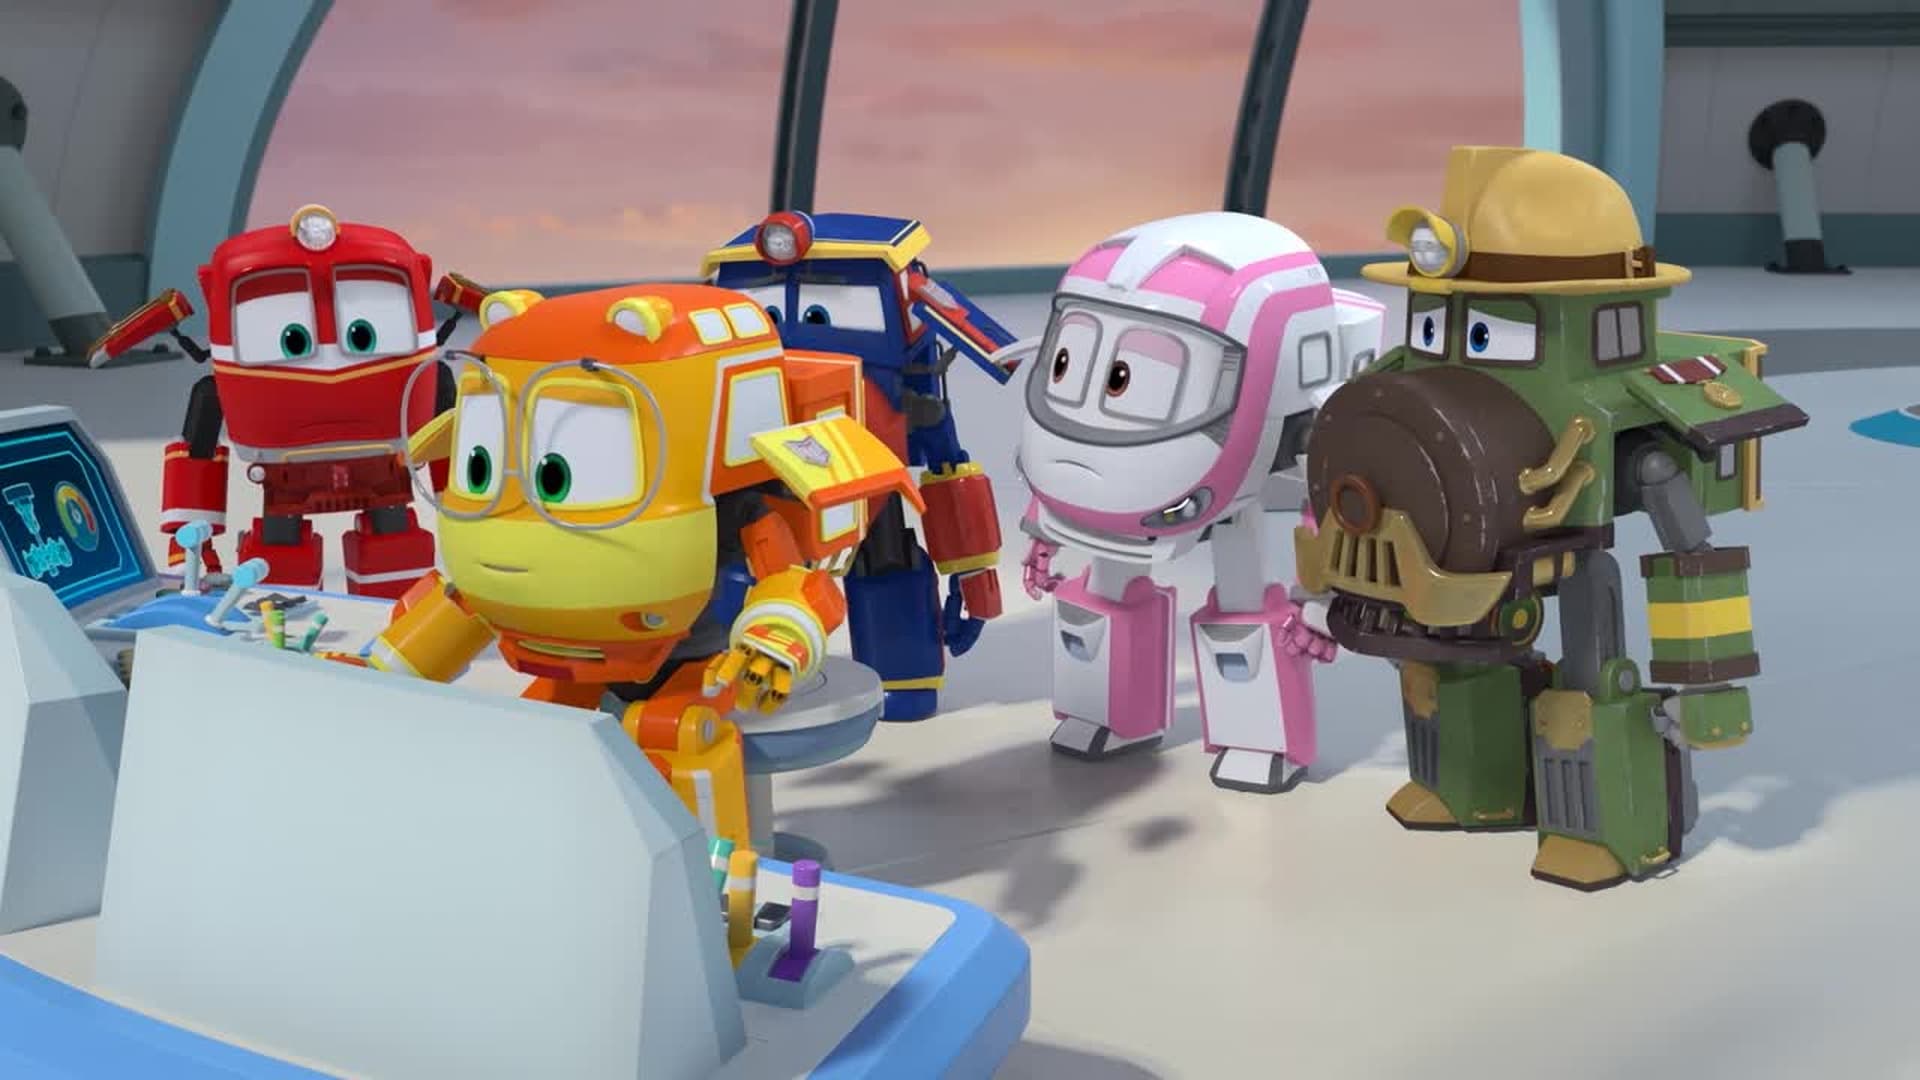 Watch Robot Trains S02:E11, Kay, Rescue Duck Free TV